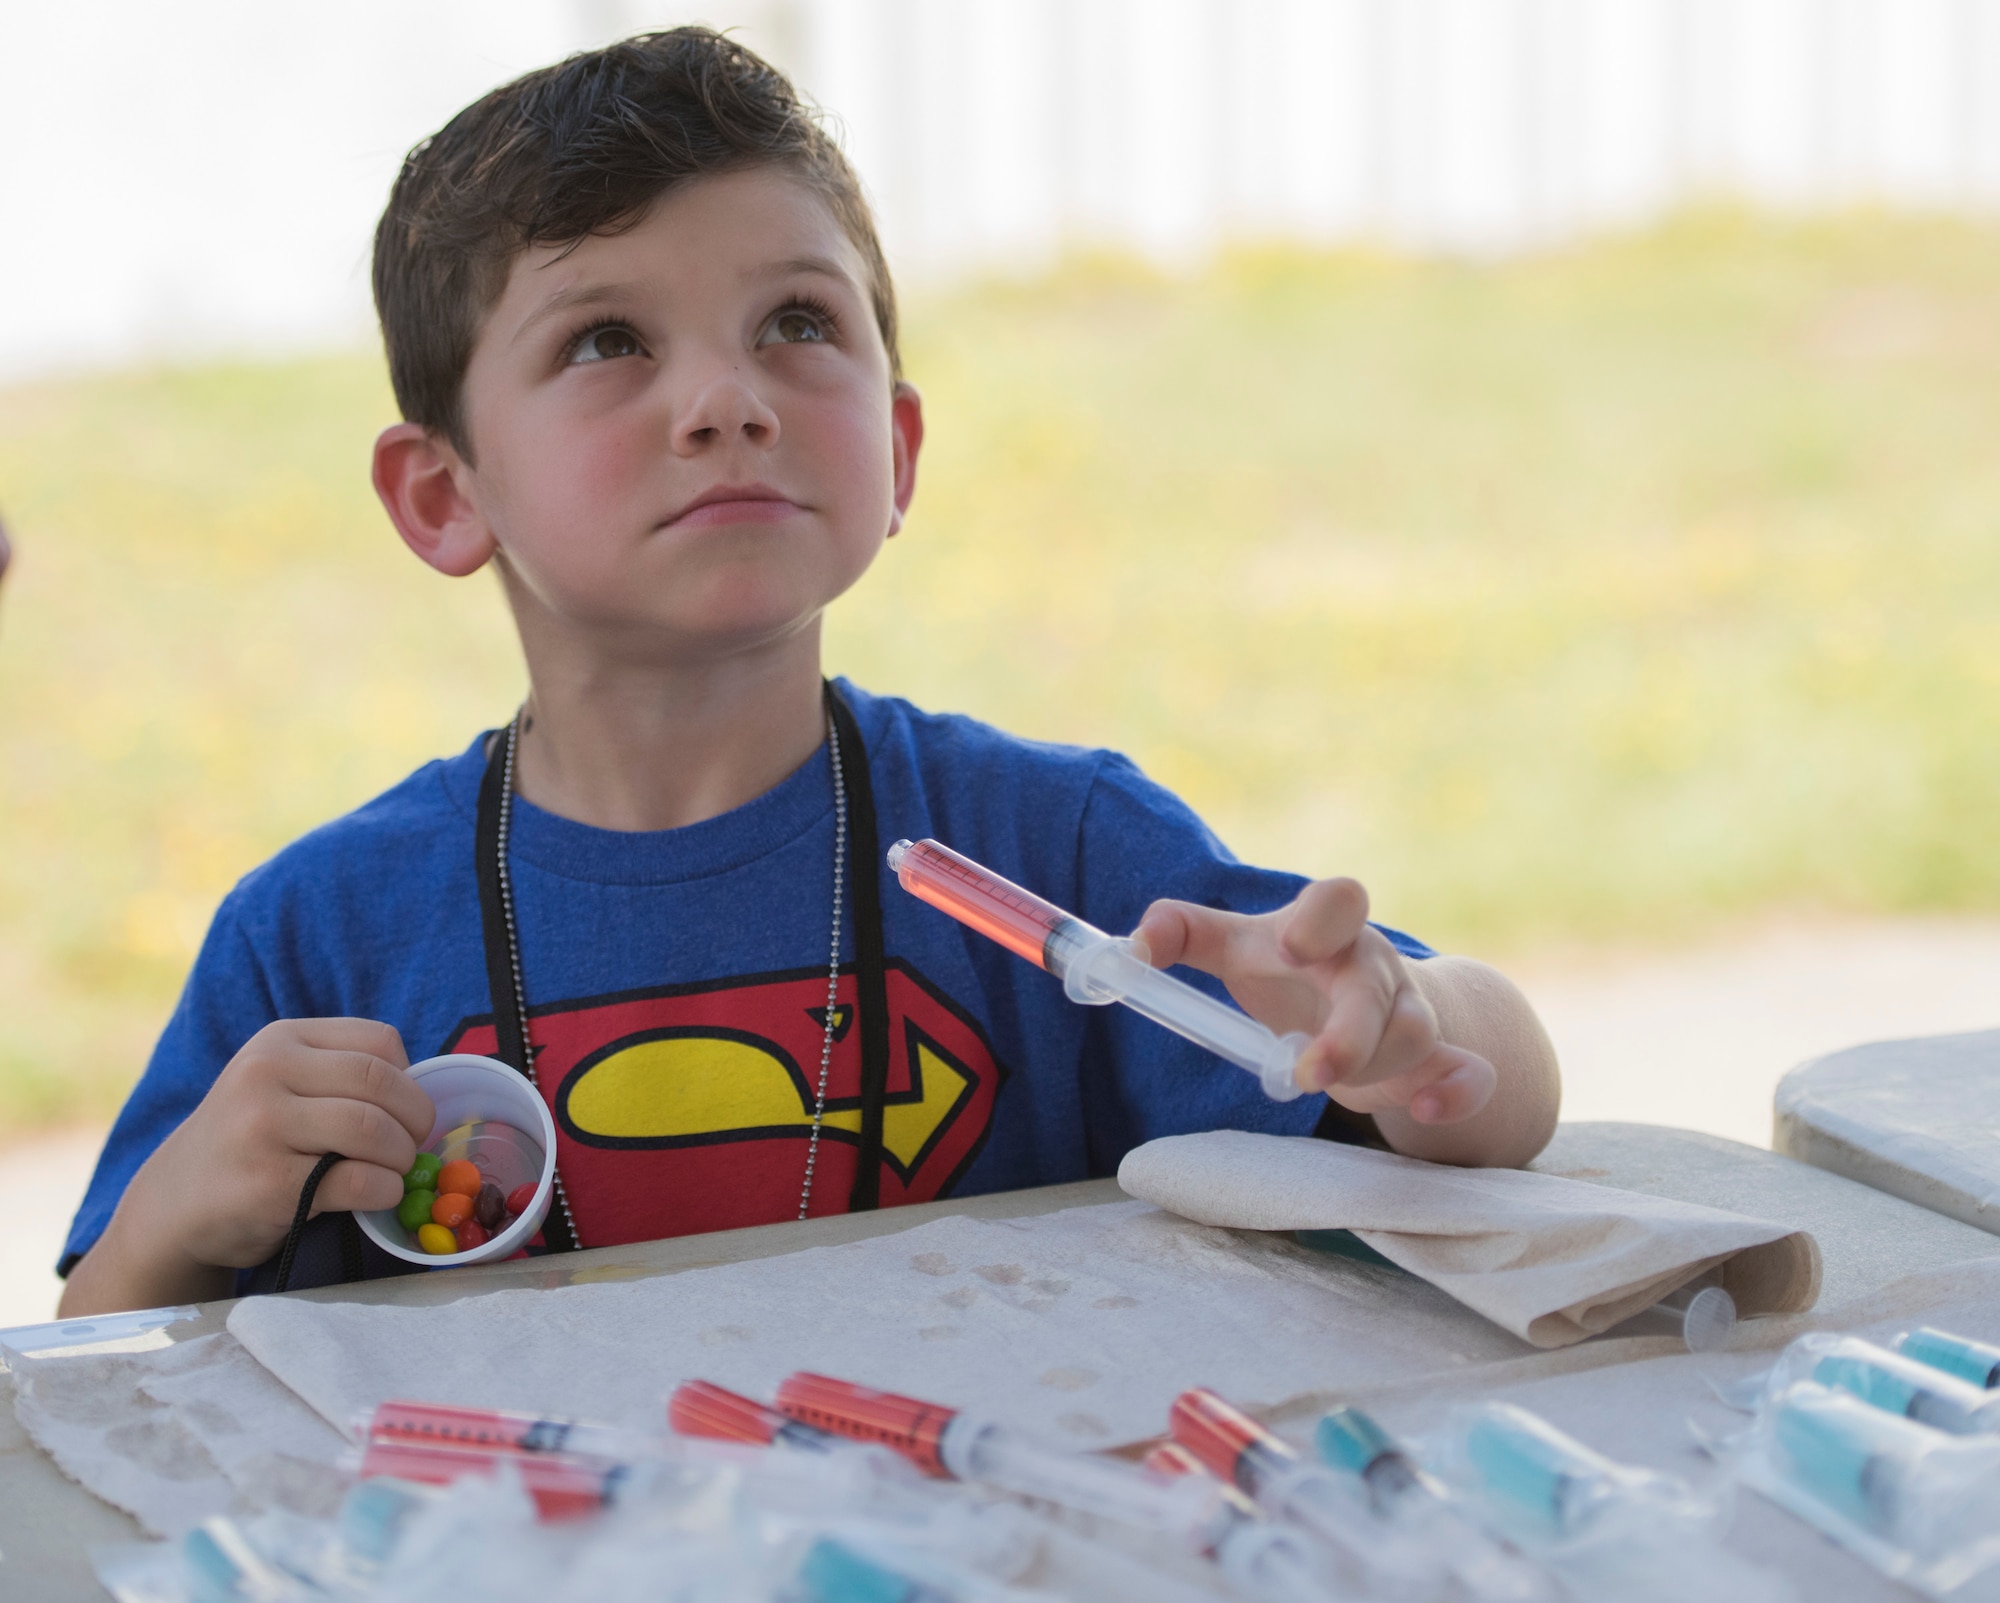 More than 470 kids participated in Operation Hero. The event was set up to show them the process their parents go through before they leave home.